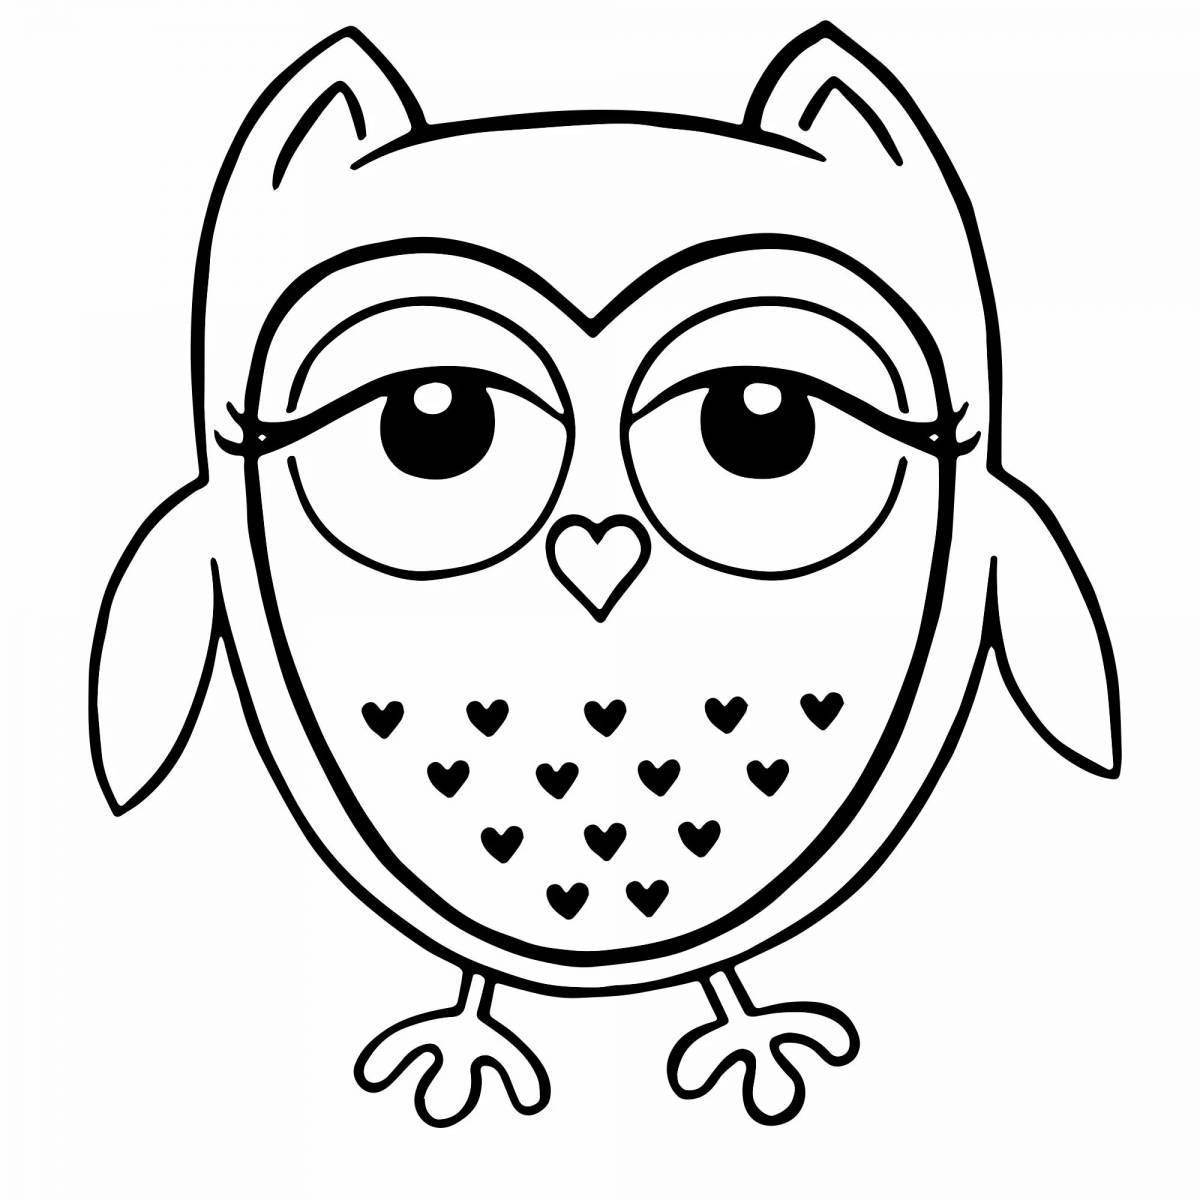 Colouring cool owlet hip hop